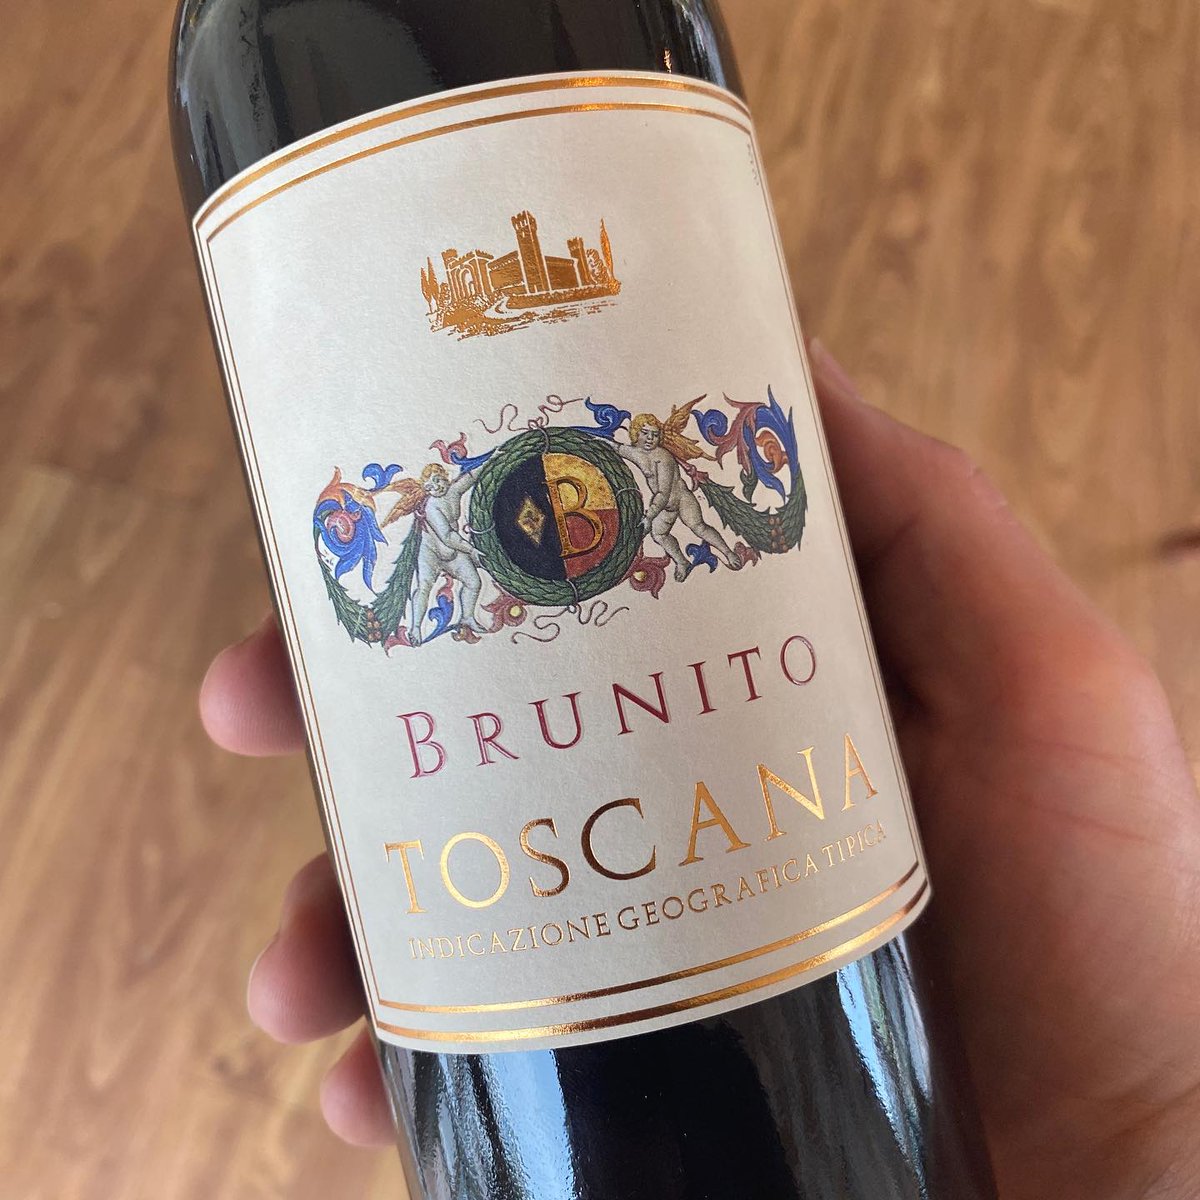 2019 Brunito Rosso Toscana IGT, Da Vinci, Italy £11.99 We bought 6 bottles of this Tuscan Sangiovese to test by the glass in The Wine Loft and It was an immediate winner. A smooth, elegant red with a touch of residual sugar. We immediately stocked up and put on the website.